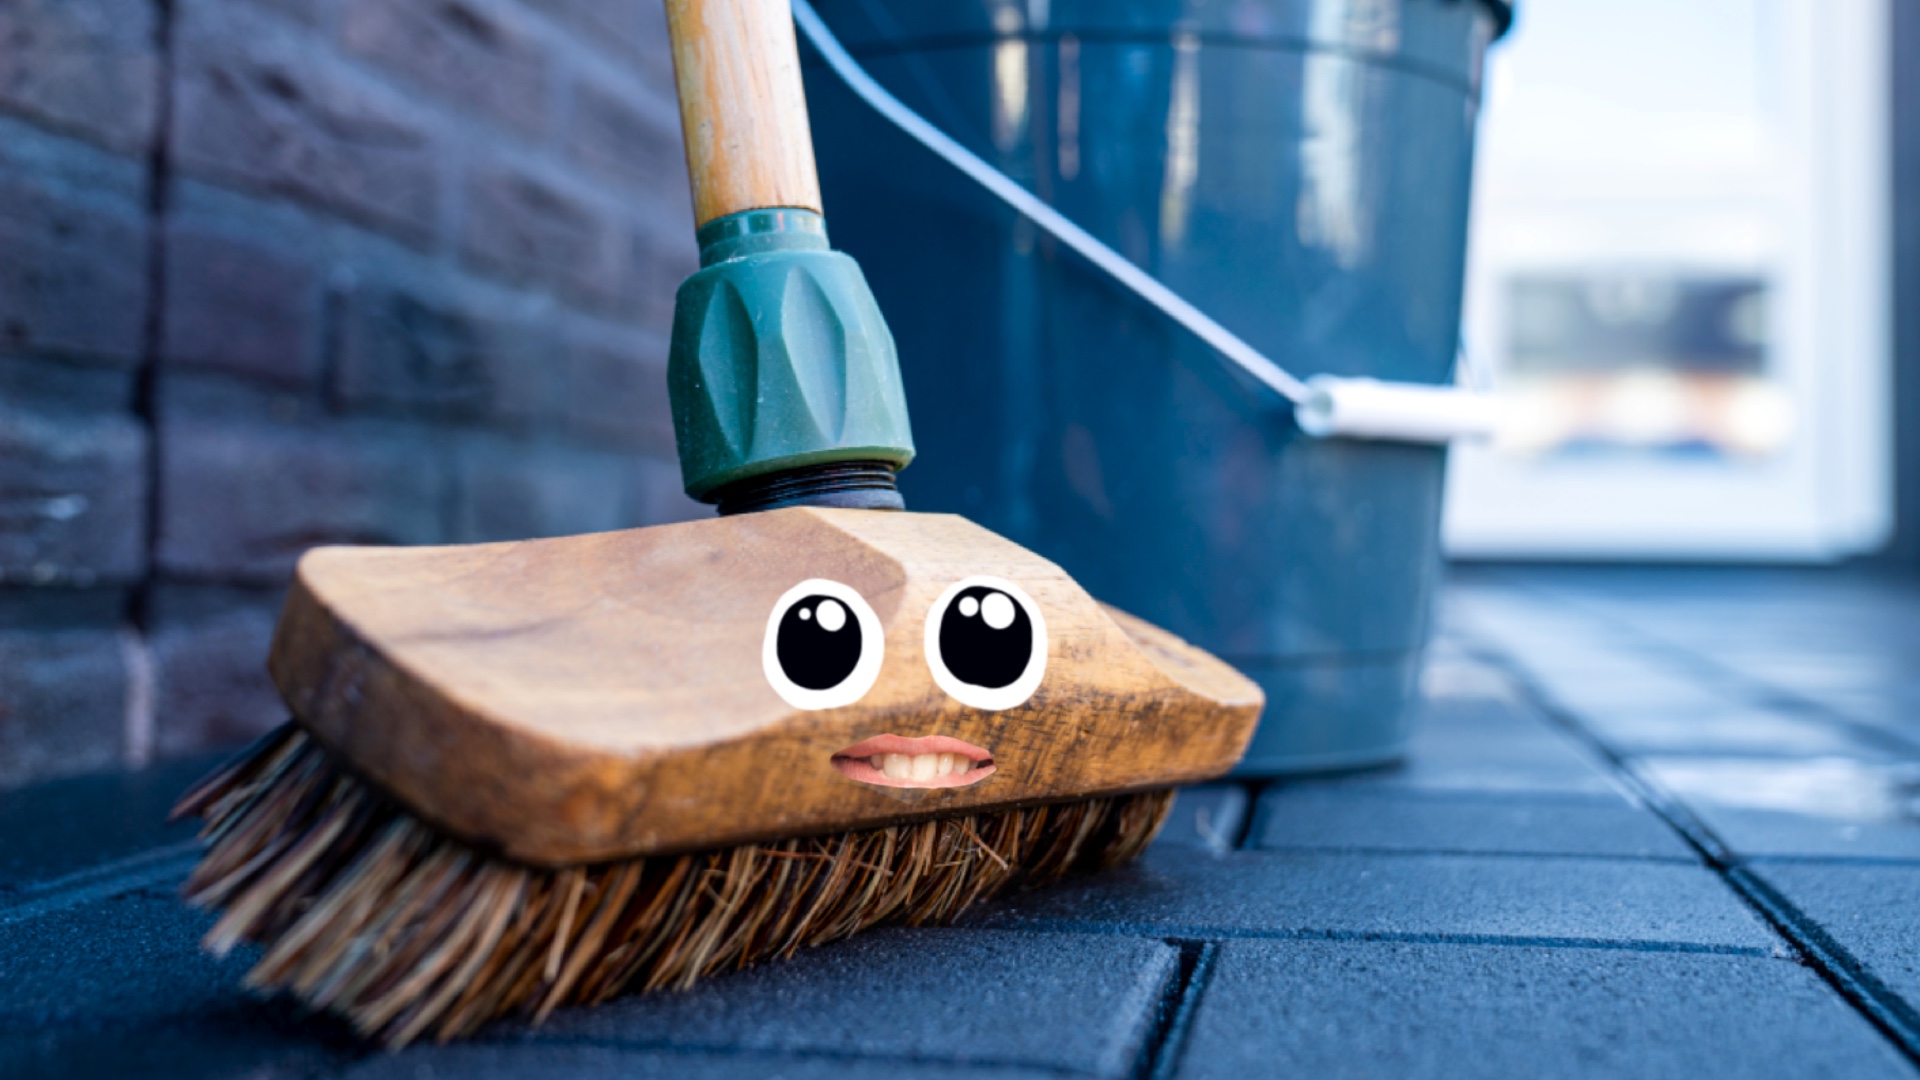 Sweep attack is illustrated by a picture of a broom. Hilarious! 